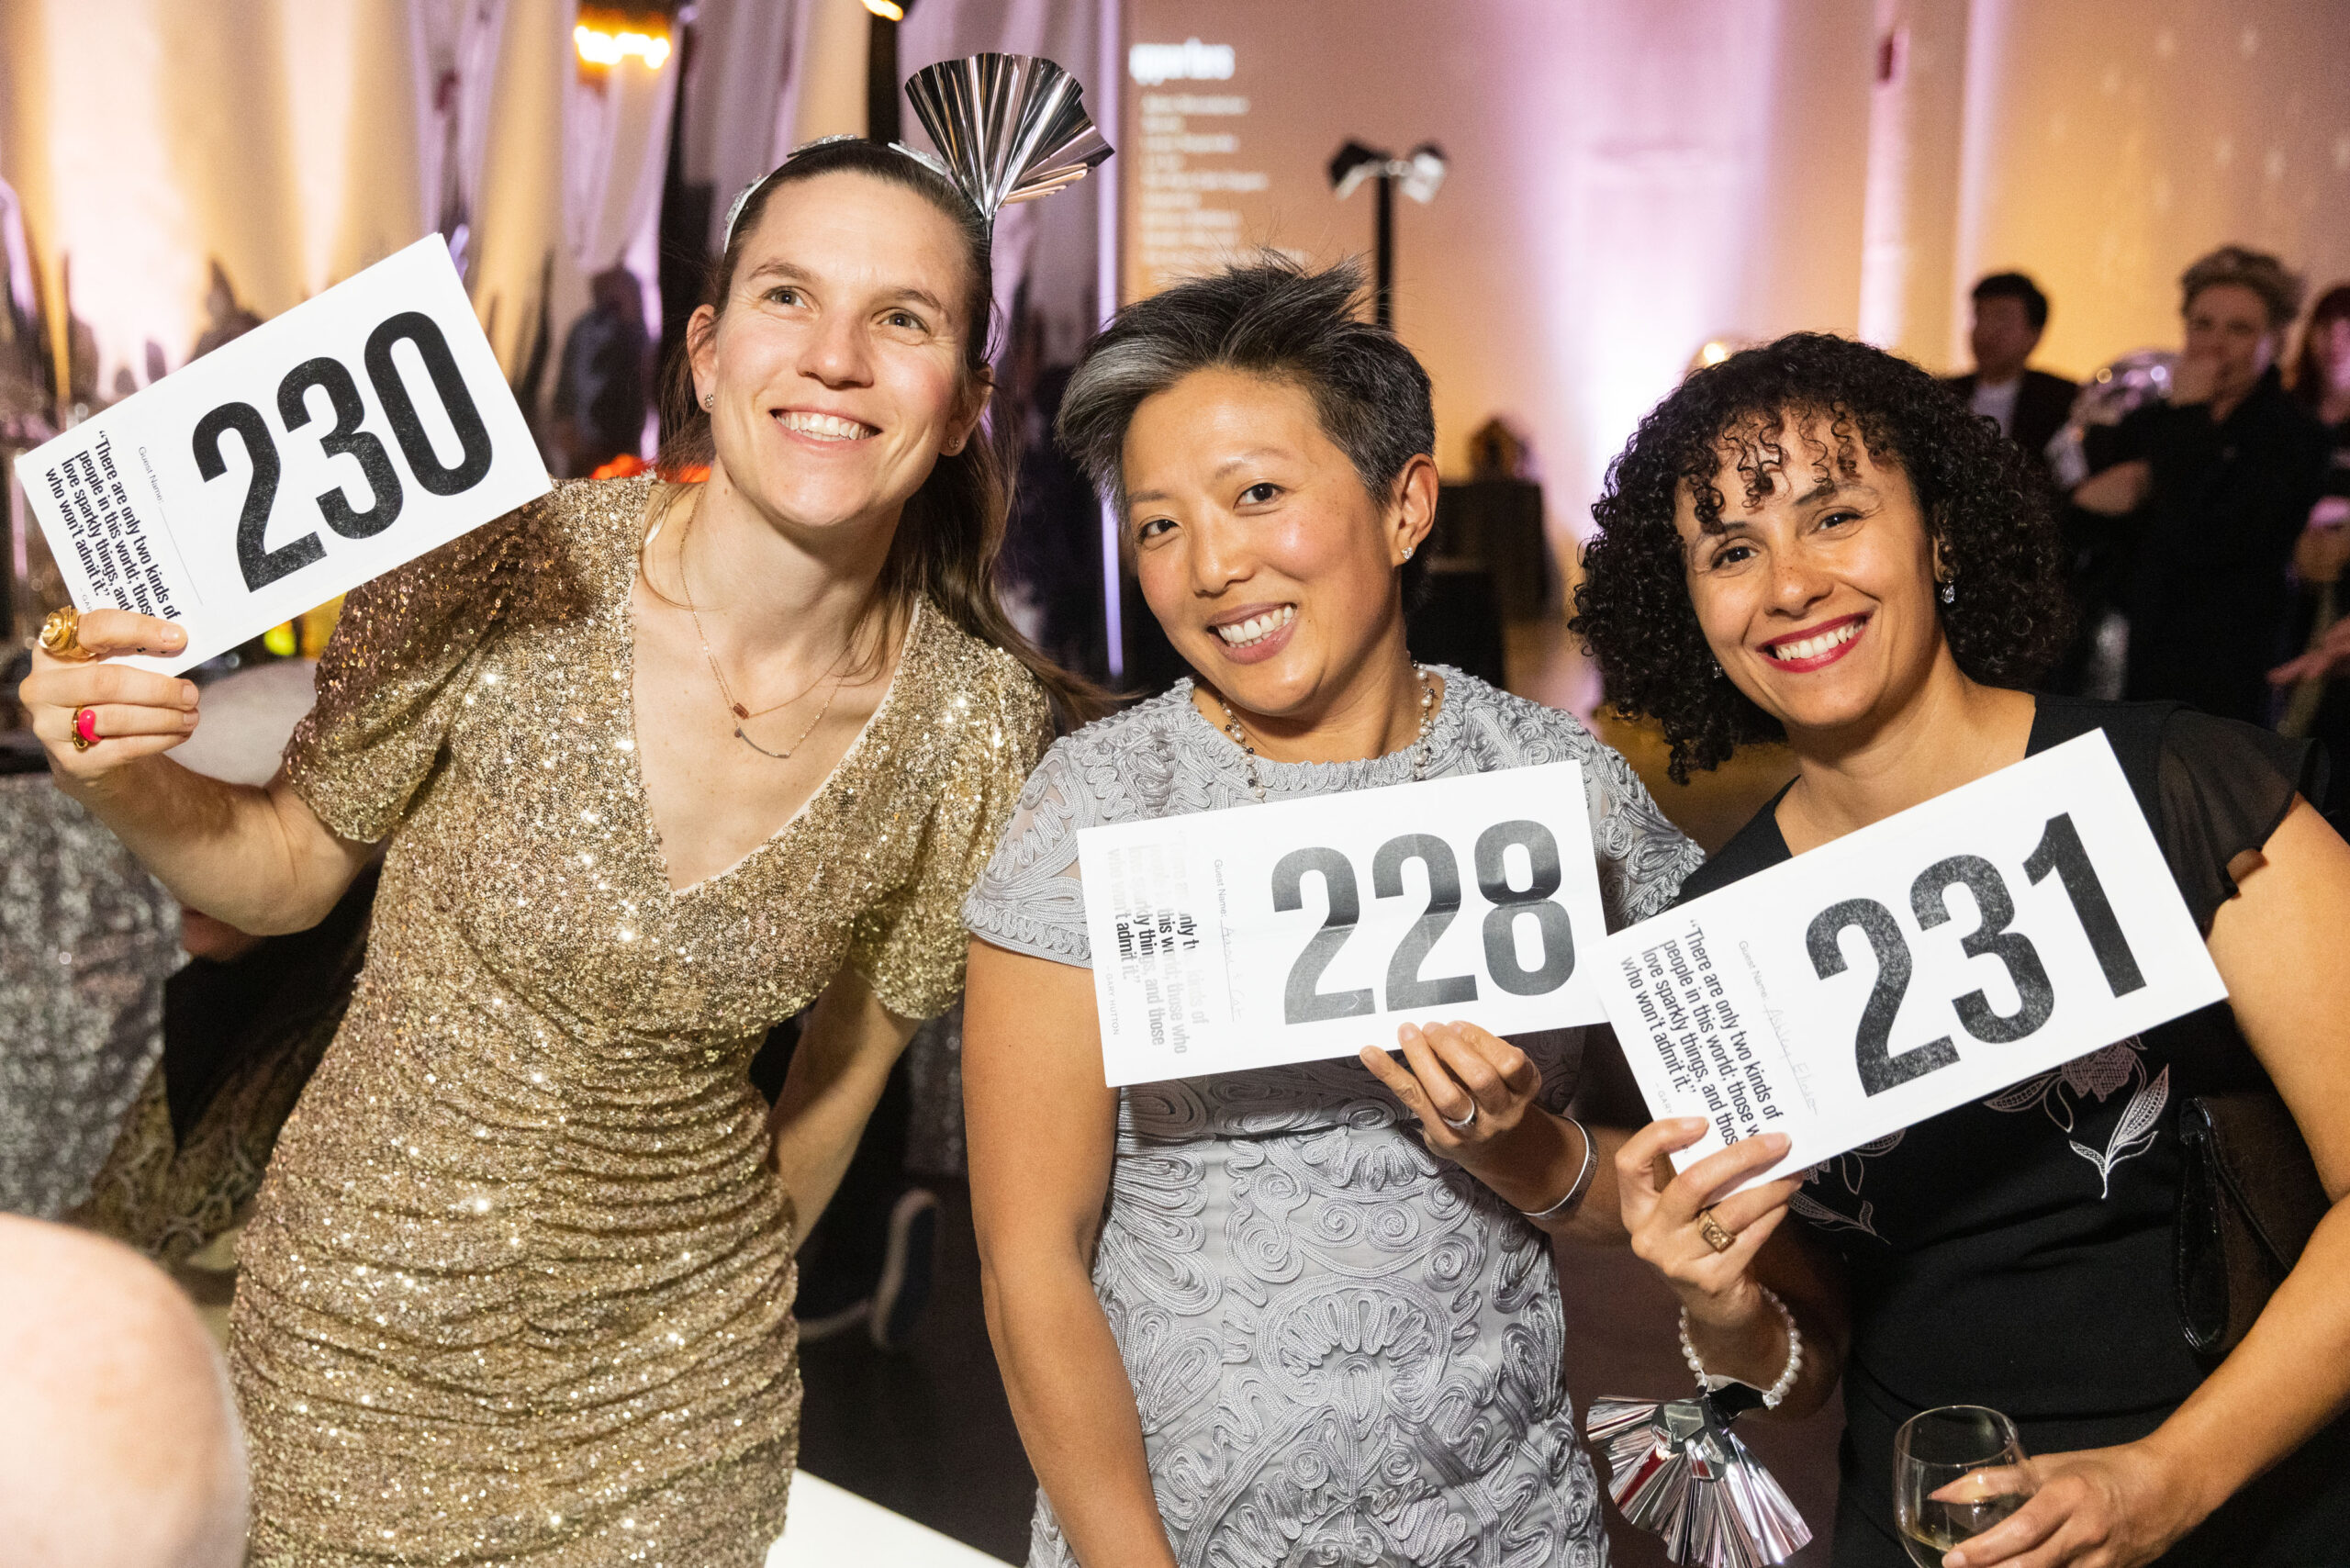 Three ladies holding up black and white auction bid numbers.